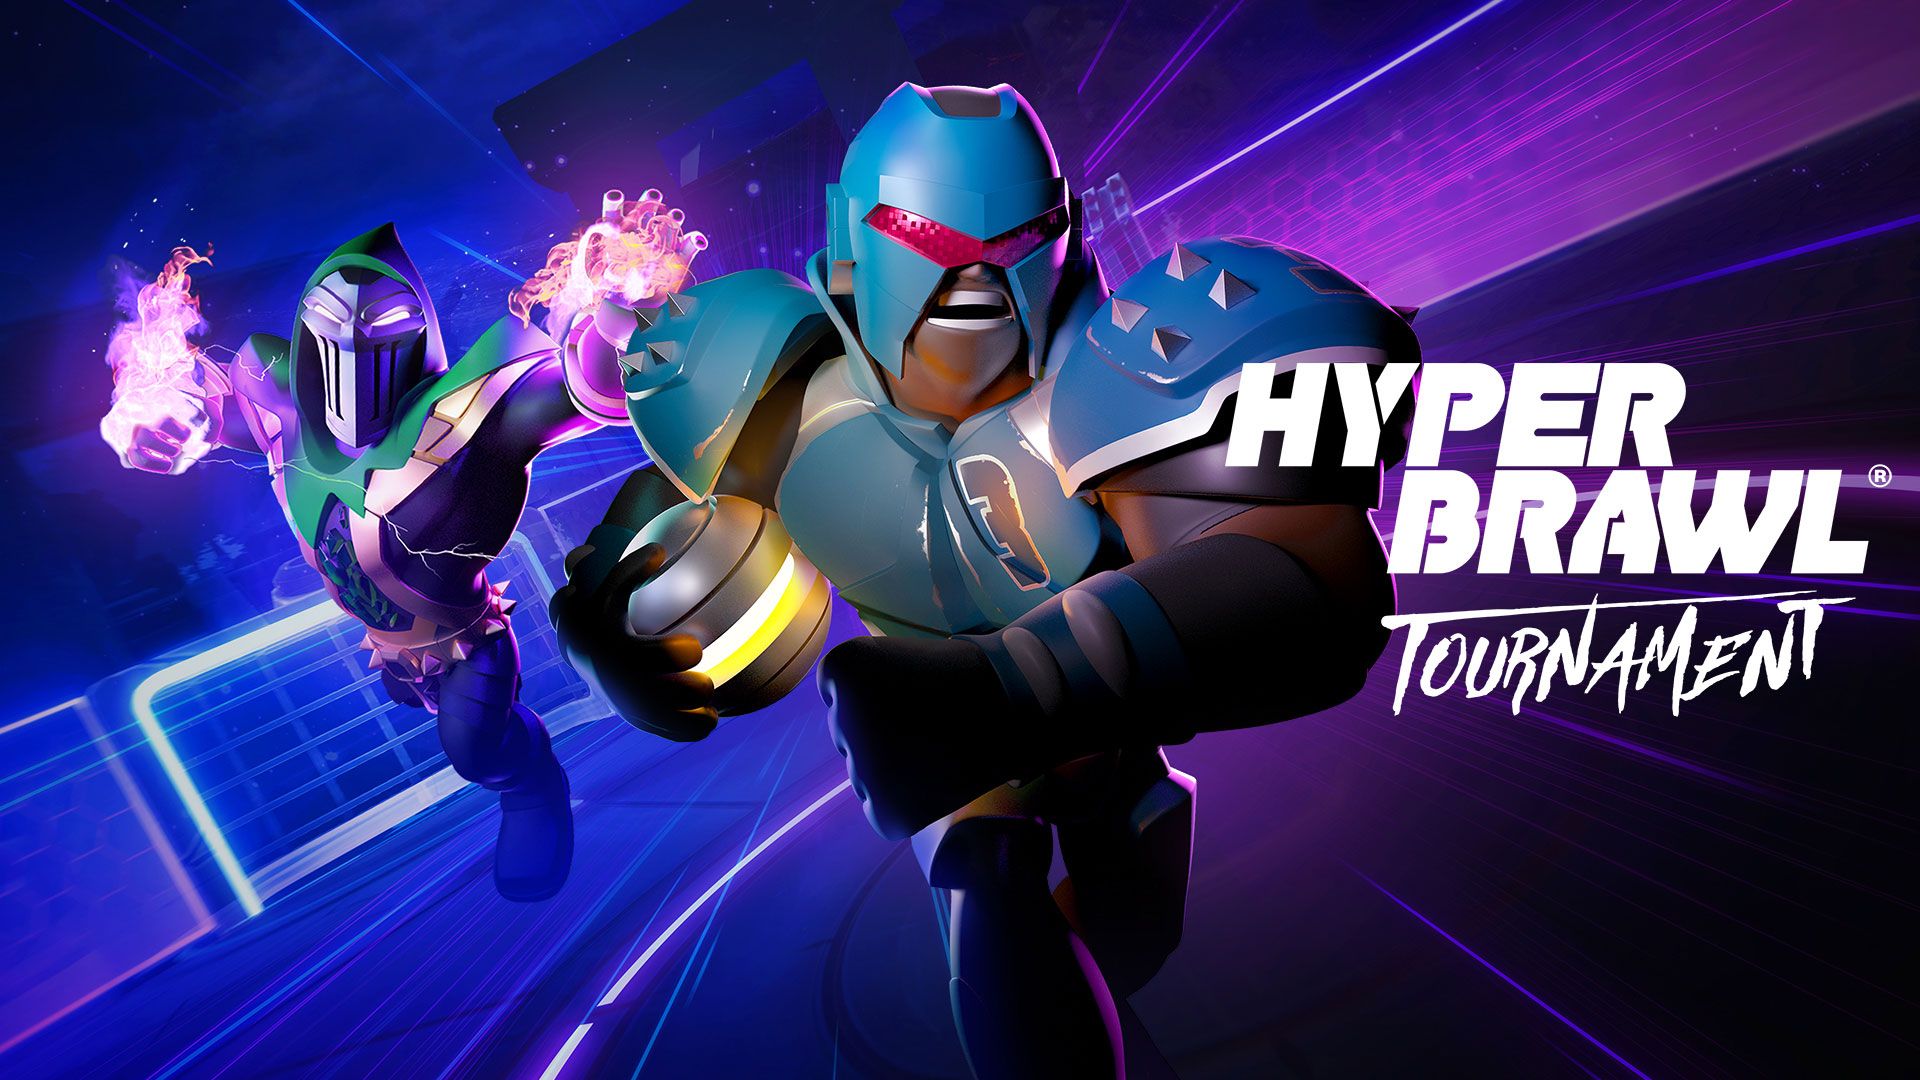 HyperBrawl Tournament: The Multiplayer Sports Brawler is Available Now on Xbox One